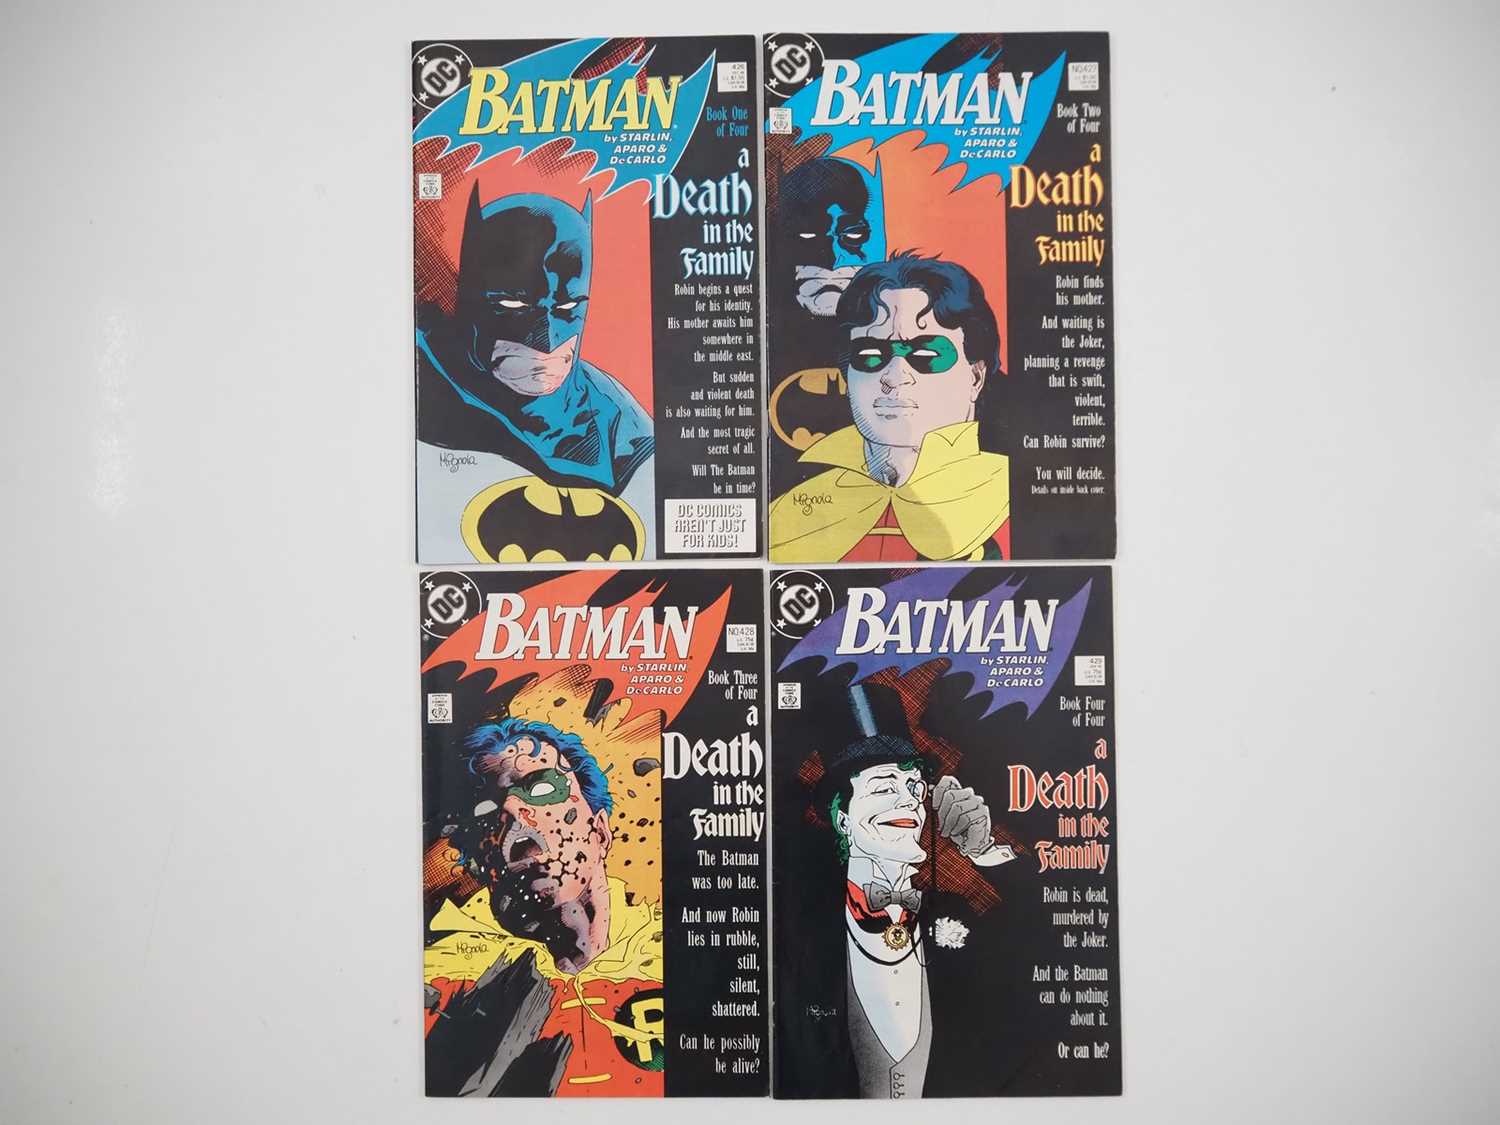 BATMAN #426, 427, 428, 429 (4 in Lot) - (1988/89 - DC) - ALL 4 issues of the "A Death in the Family"